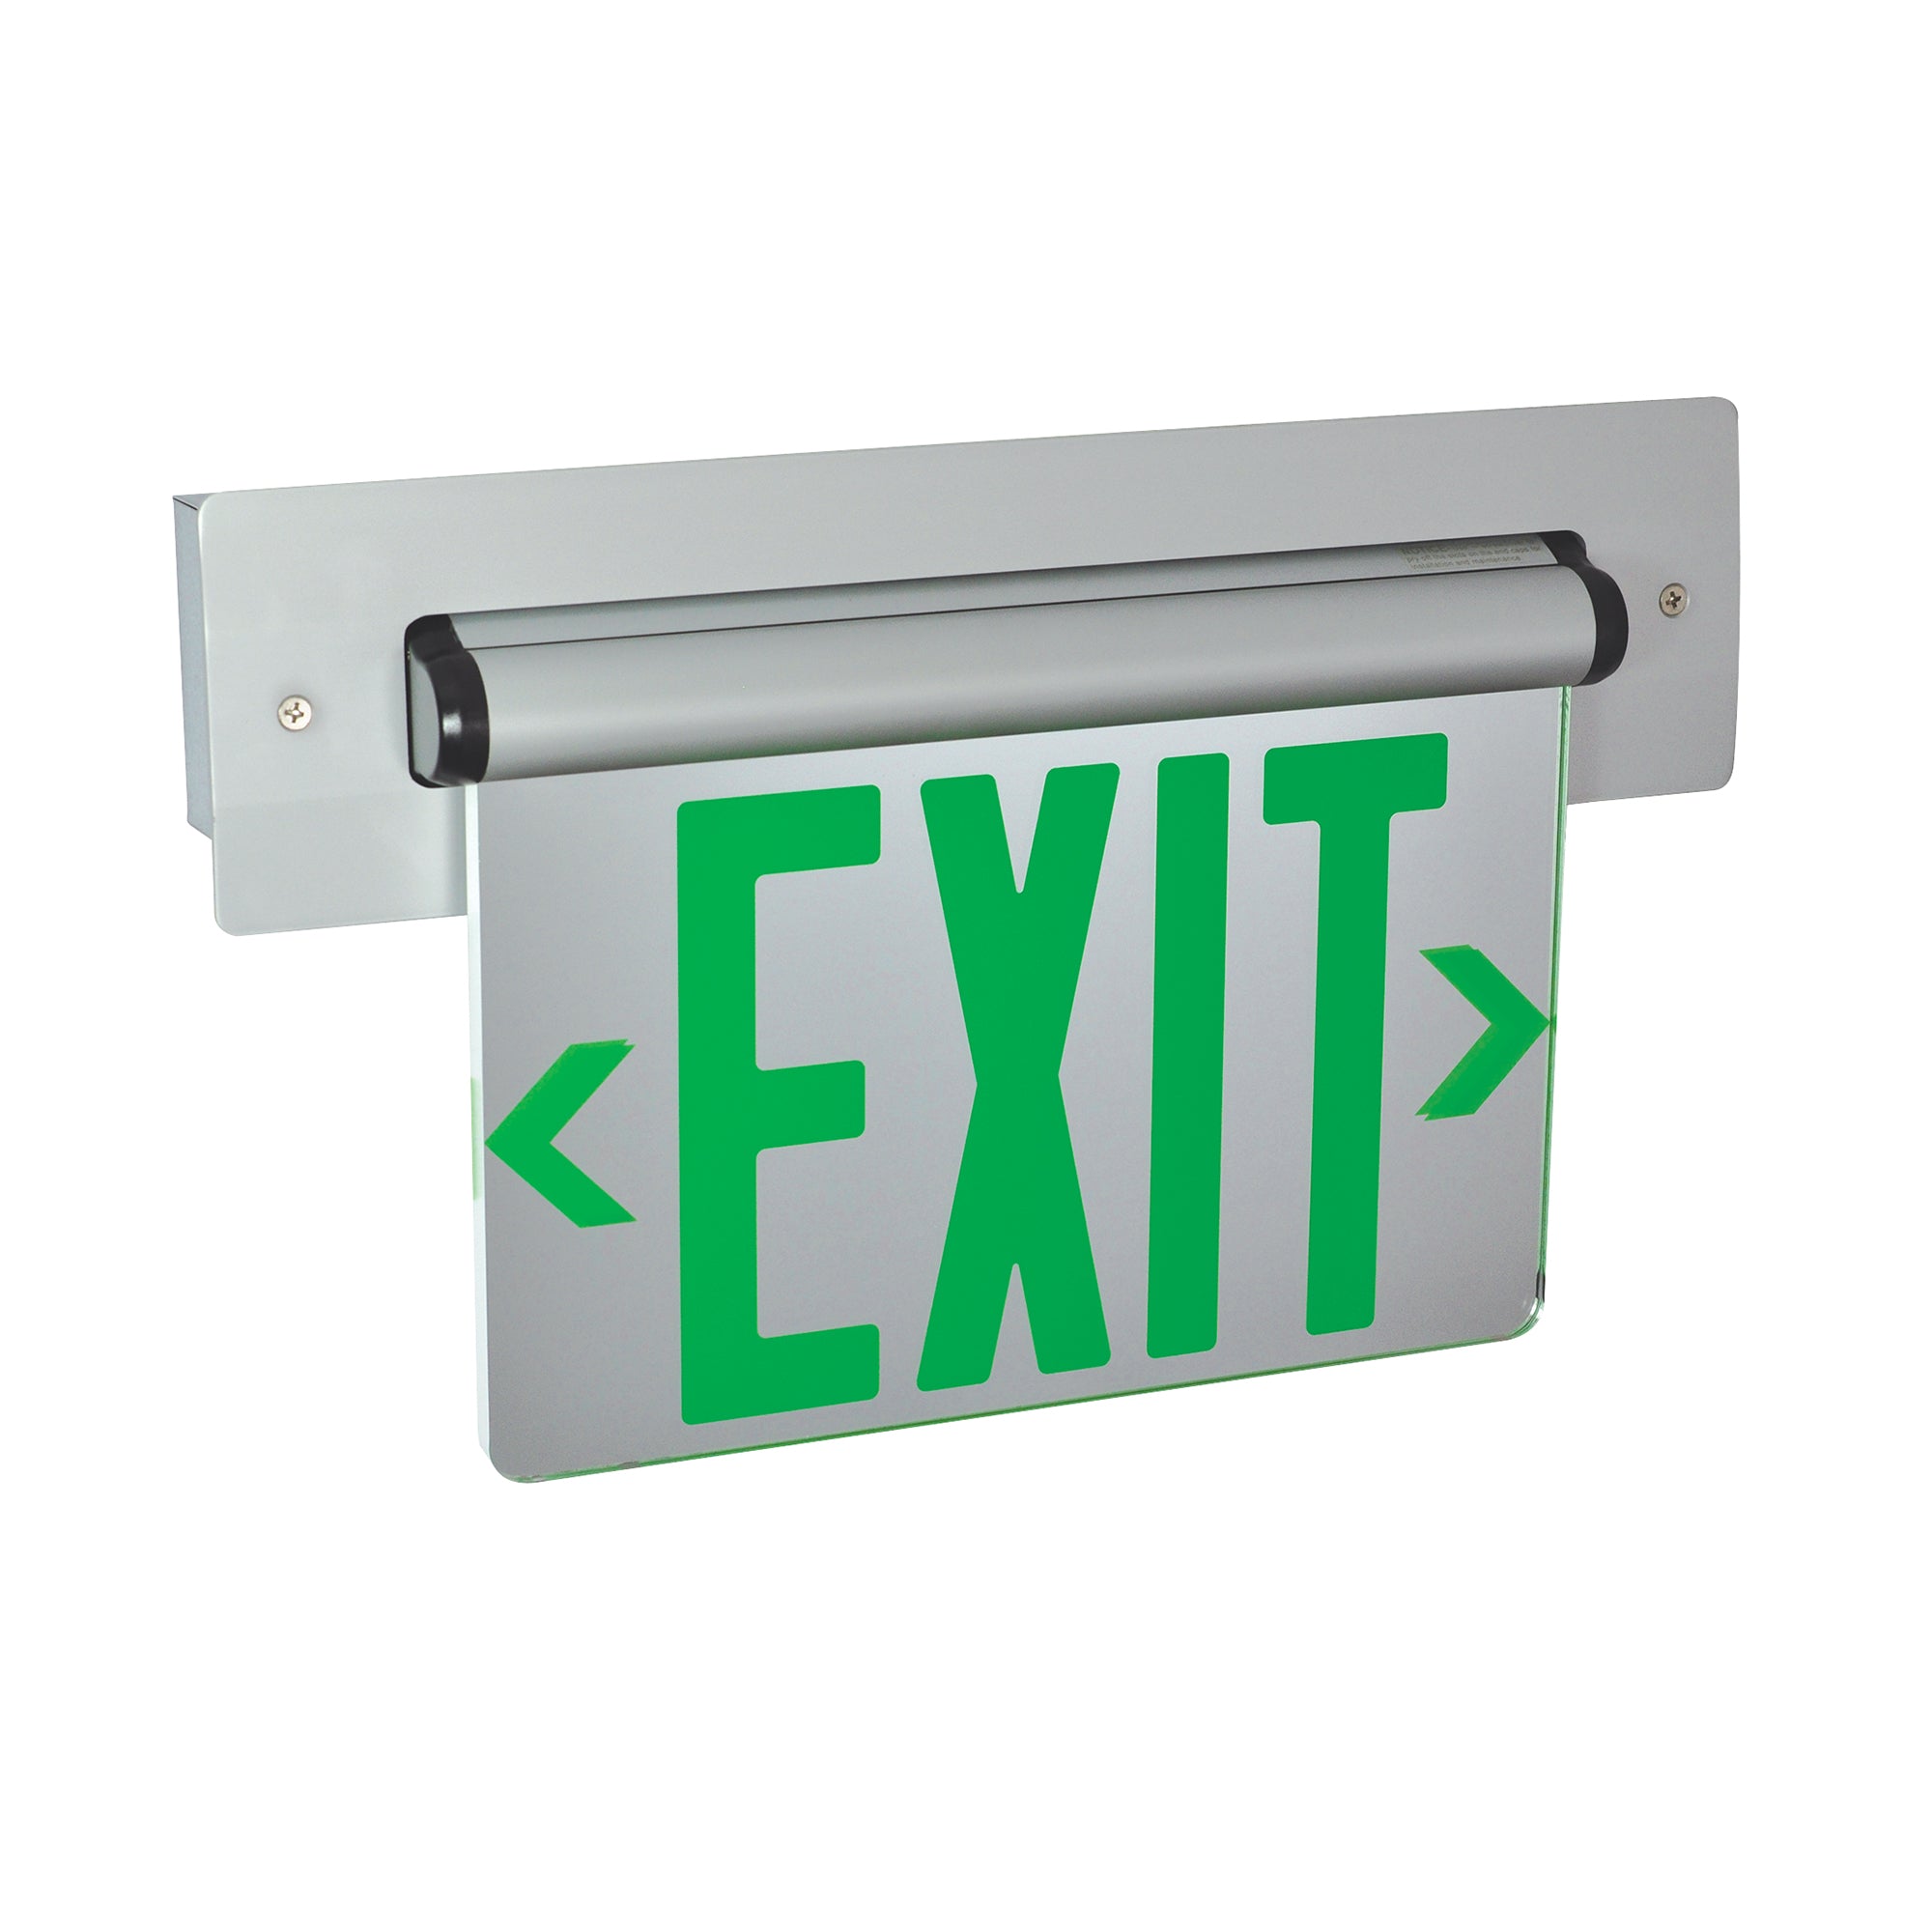 Nora Lighting NX-814-LEDGMW - Exit / Emergency - Recessed Adjustable LED Edge-Lit Exit Sign, 2 Circuit, 6 Inch Green Letters, Single Face / Mirrored Acrylic, White Housing